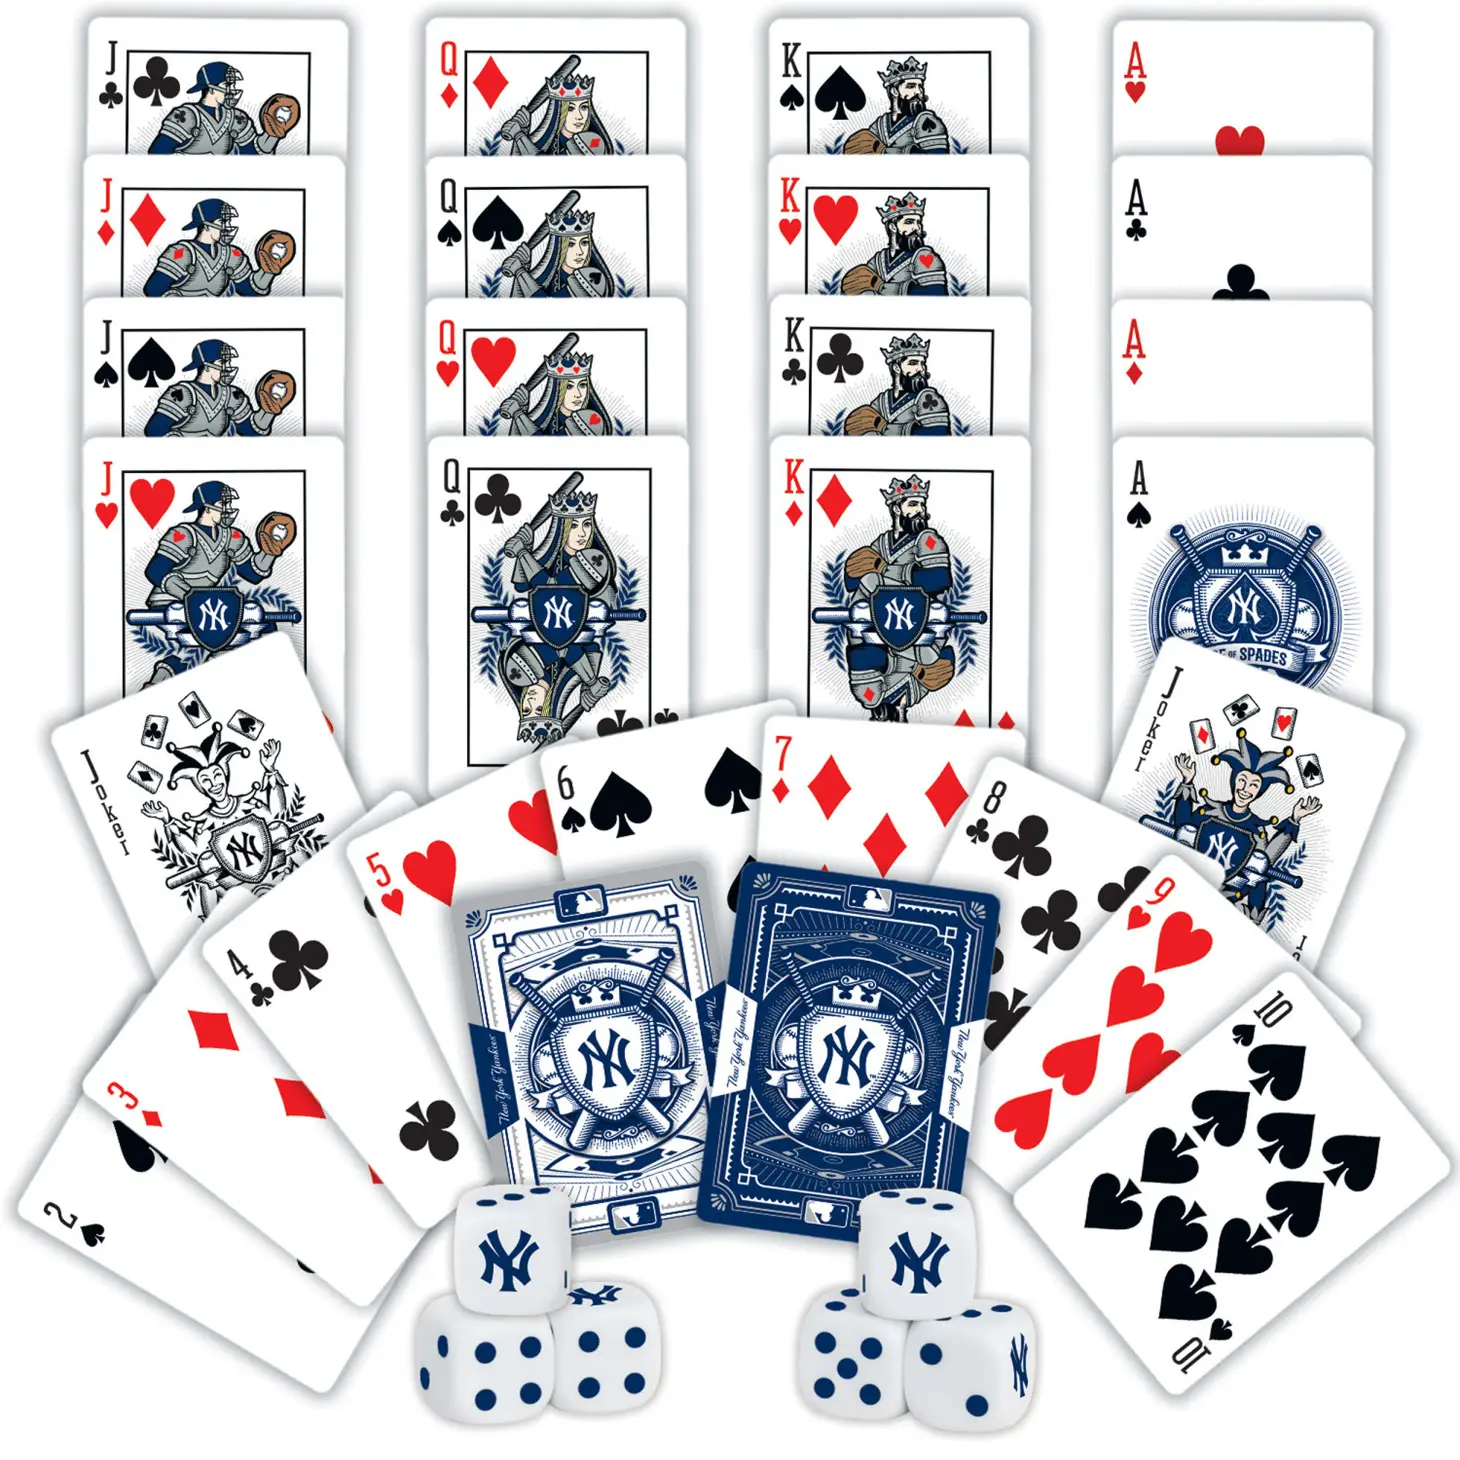 New York Yankees Mlb 2-pack Playing Cards & Dice Set